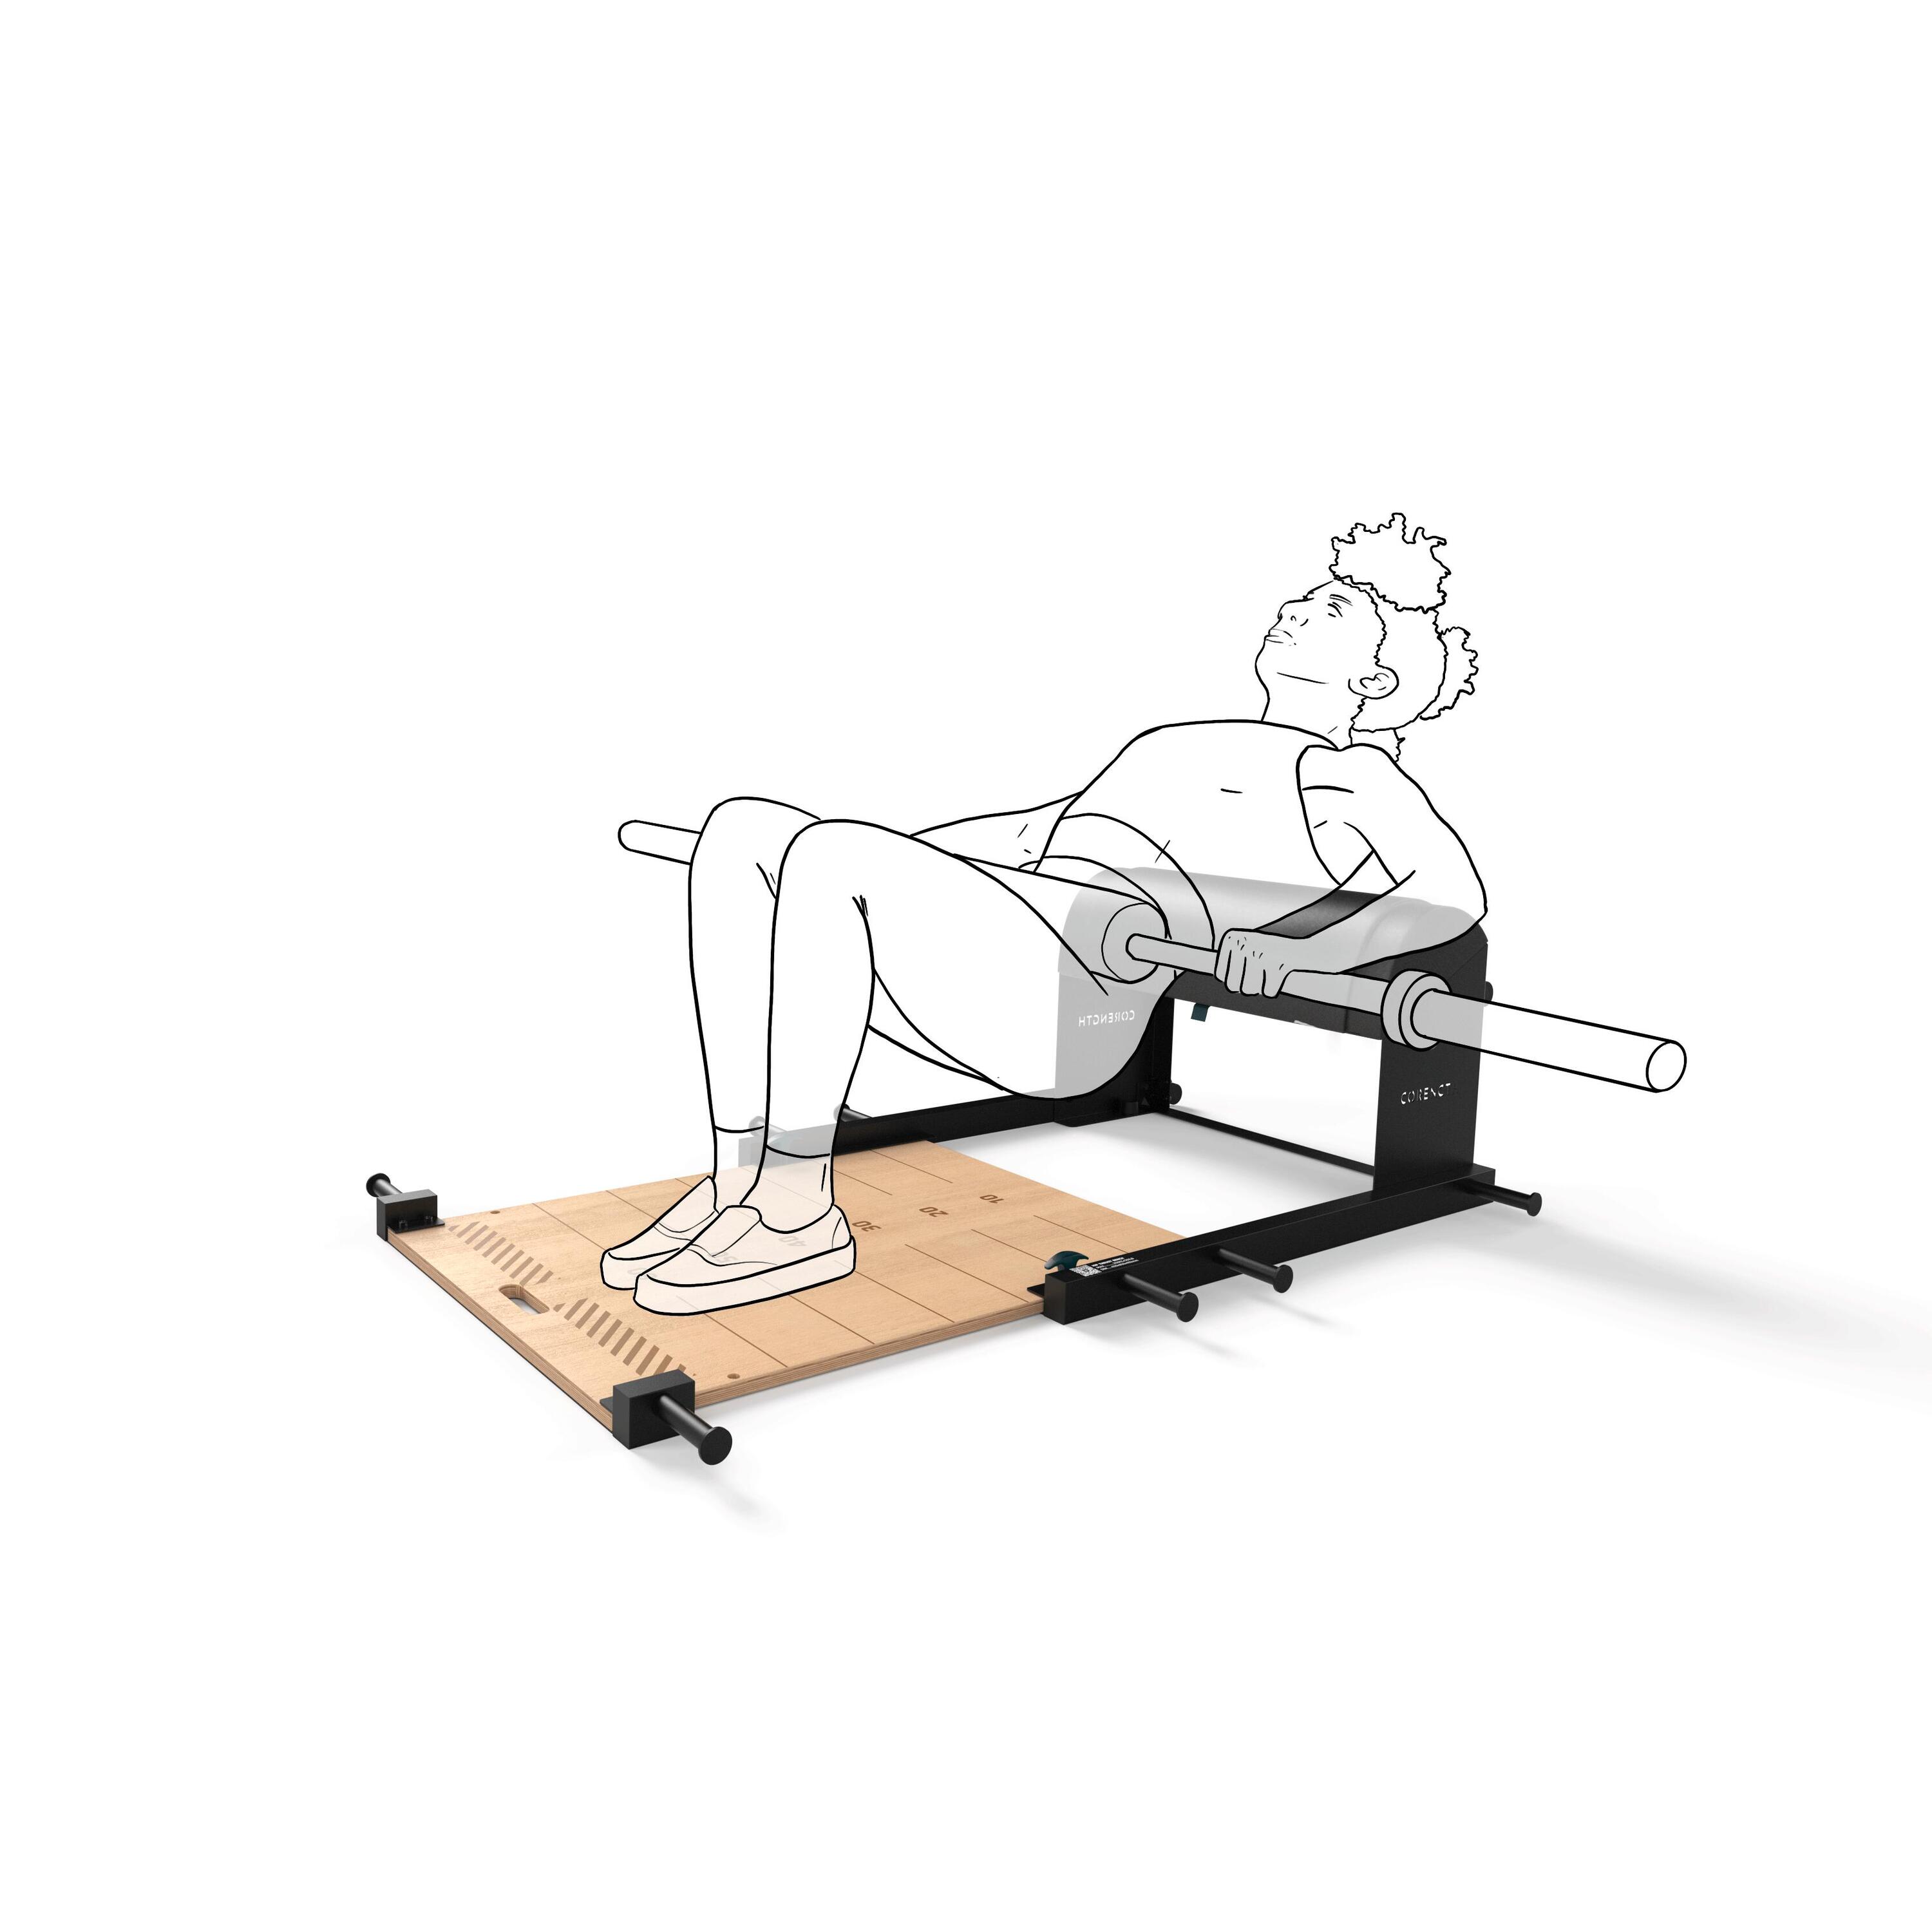 Weight Training Bench for Glutes and Lower Body - Hip Thrust Bench 3/6